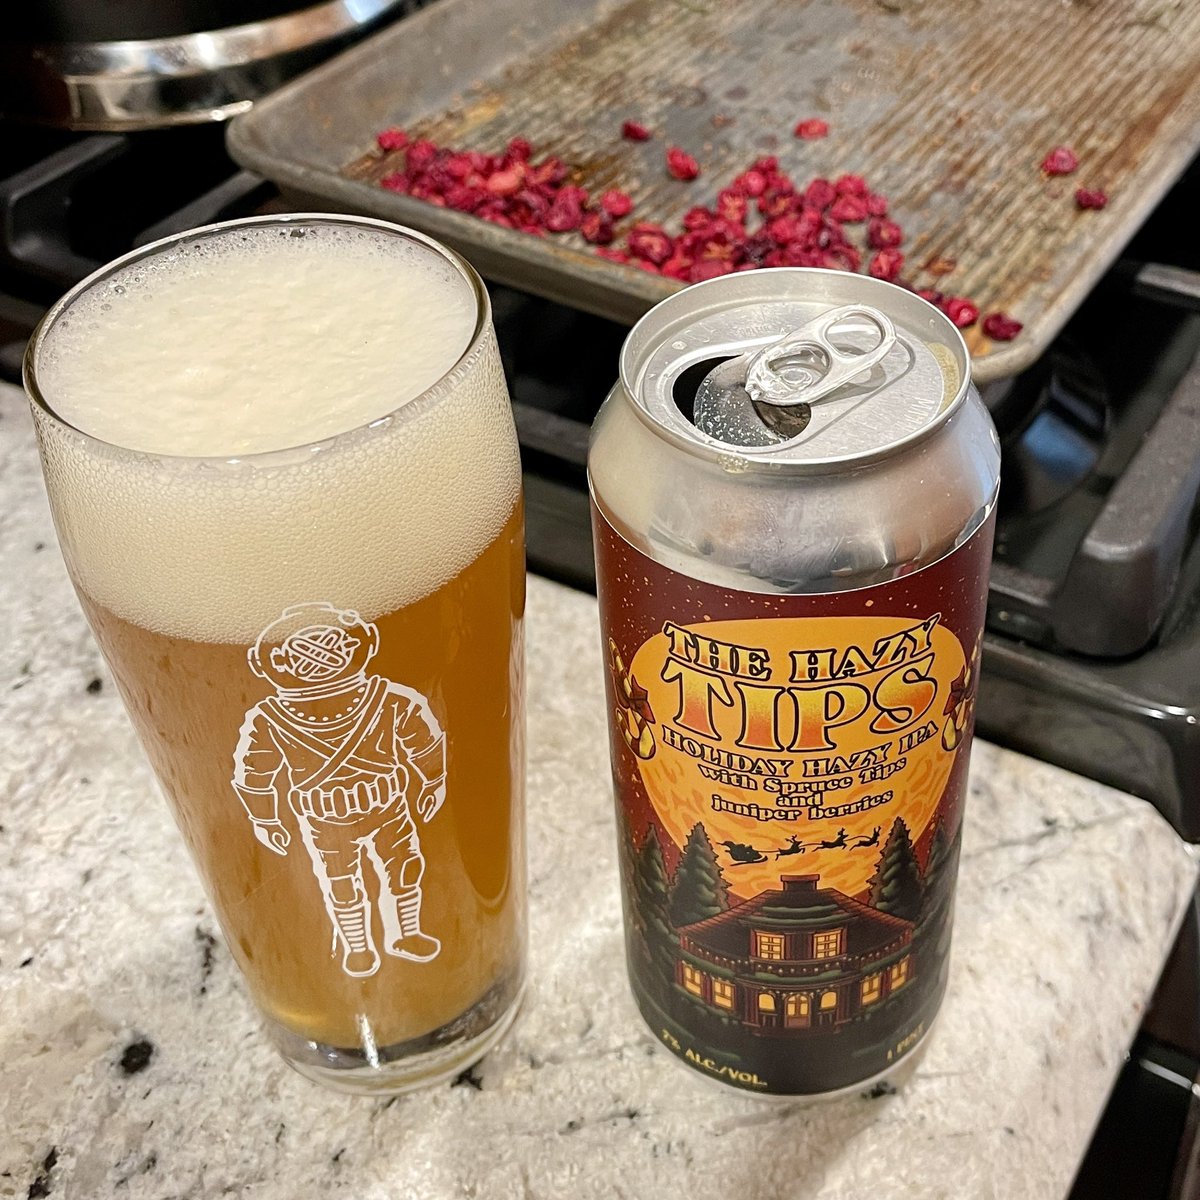 A spruce tip and juniper berry haze bomb for the holidays from the folks at @ShortFuseBeer 💣 I did drink it during ho-ho-ho time…Read more -> hopsmash.com #shortfuse #shortfusebrewing #illinoisbeer #illinoiscraftbeer #chicagobeer #hazyipa #neipa